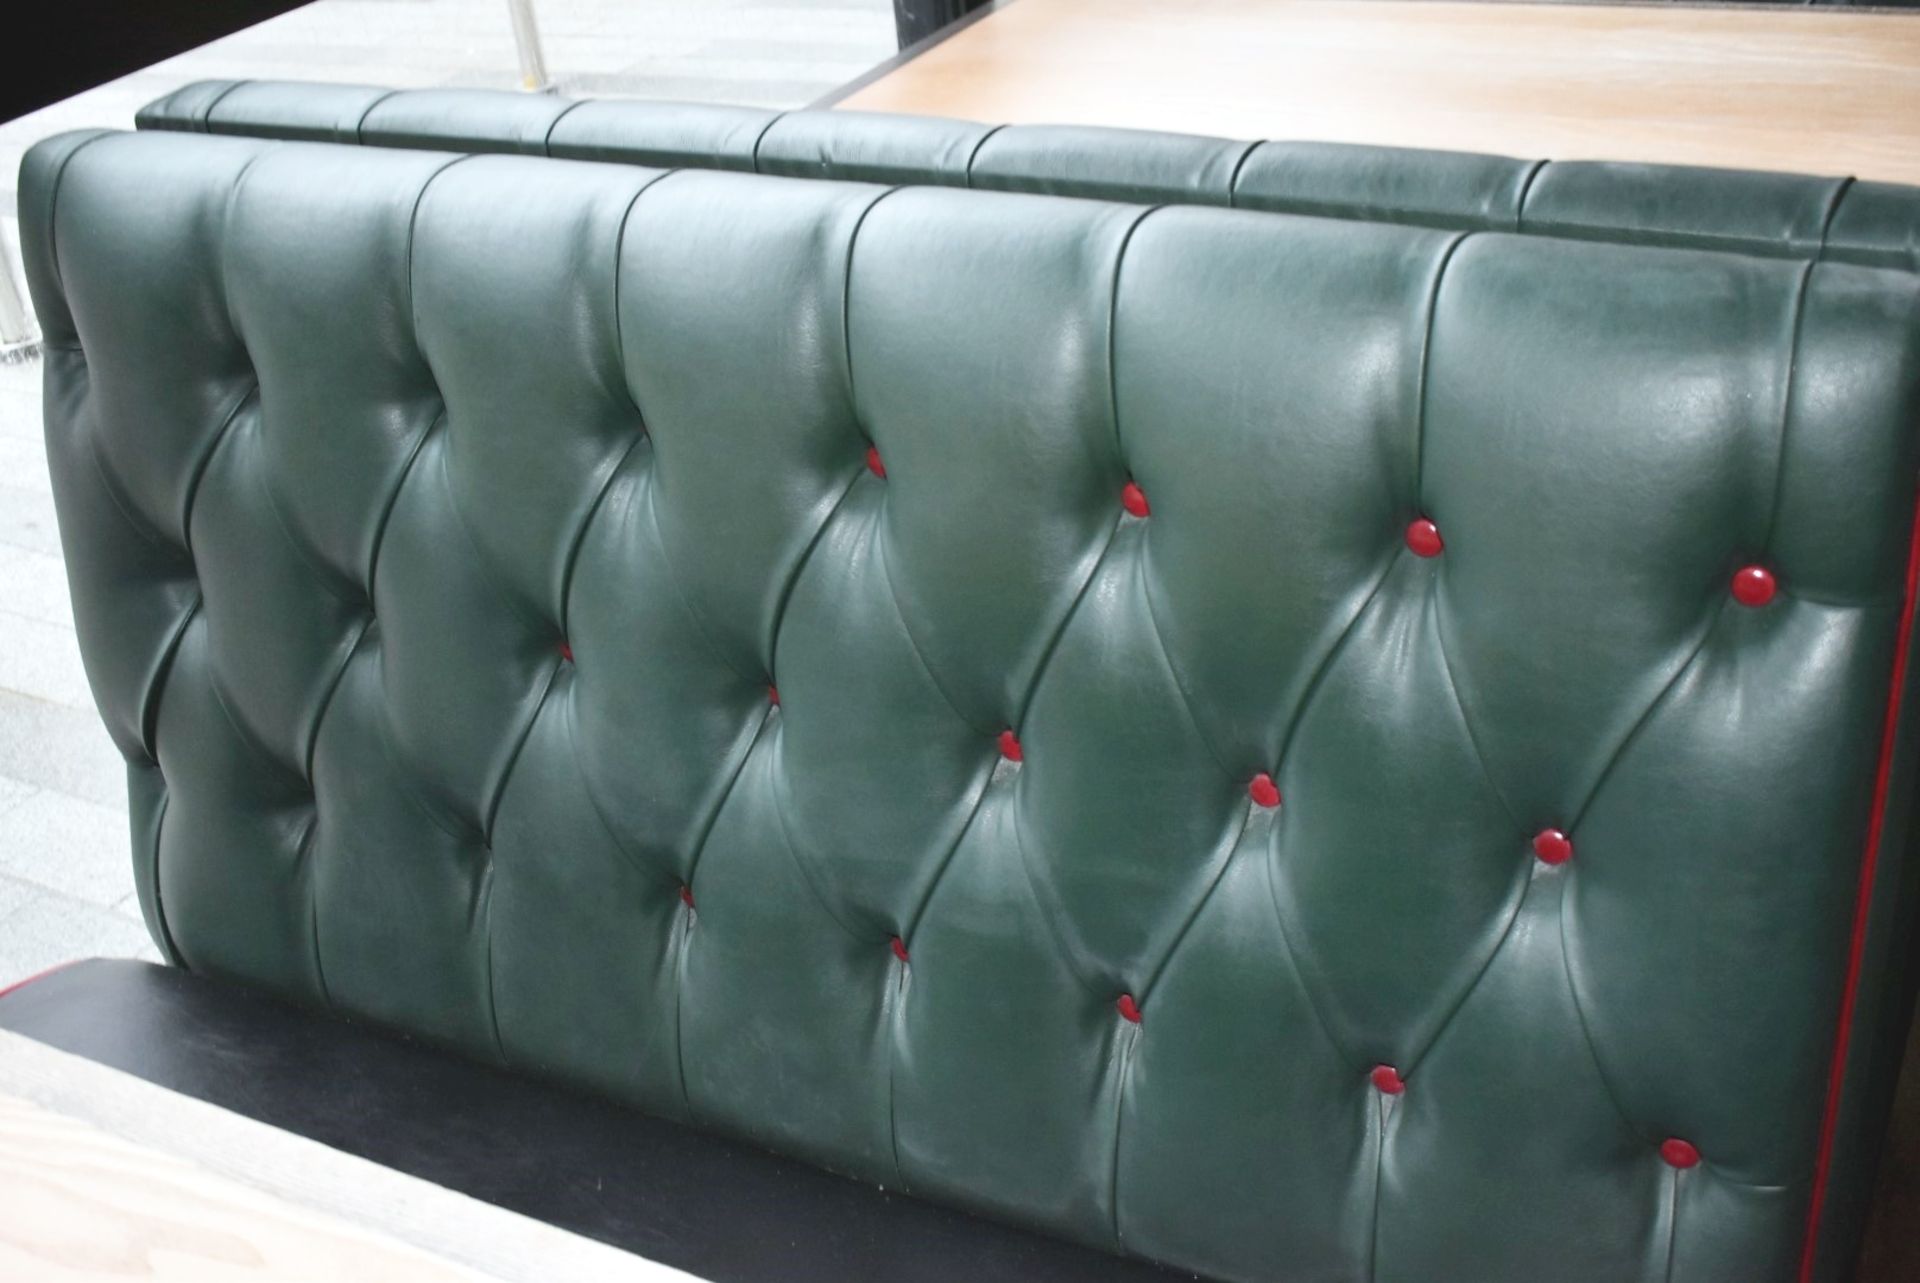 4 x Sections of Restaurant Double Booth Seating - Sits Up to 12 Persons - Green & Black Upholstery - Image 24 of 24